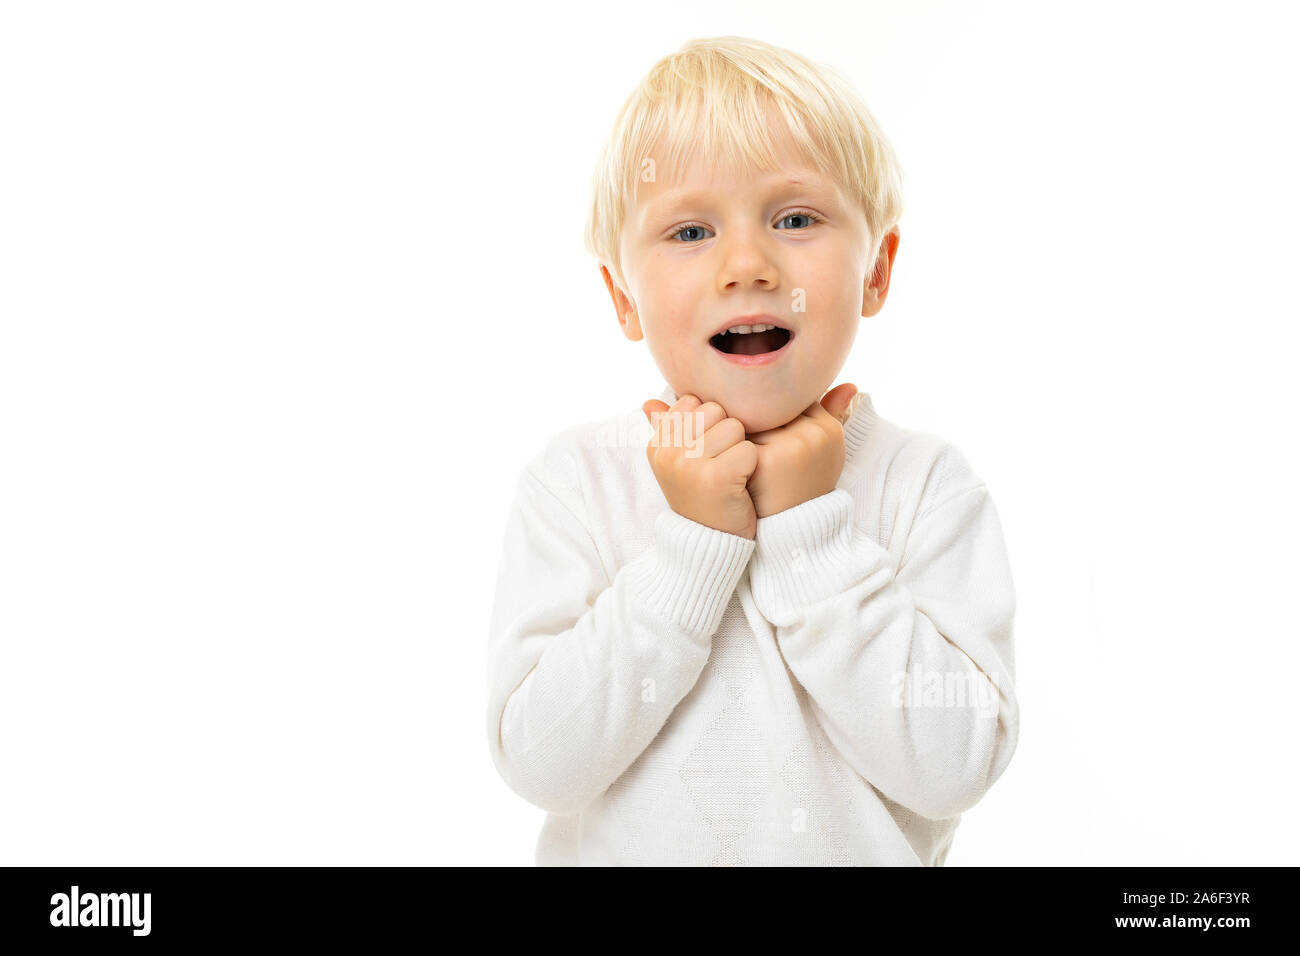 Little boy with short blonde hair, blue eyes, cute appearance, in white  jacket, light blue pants, stands and is surprised Stock Photo - Alamy